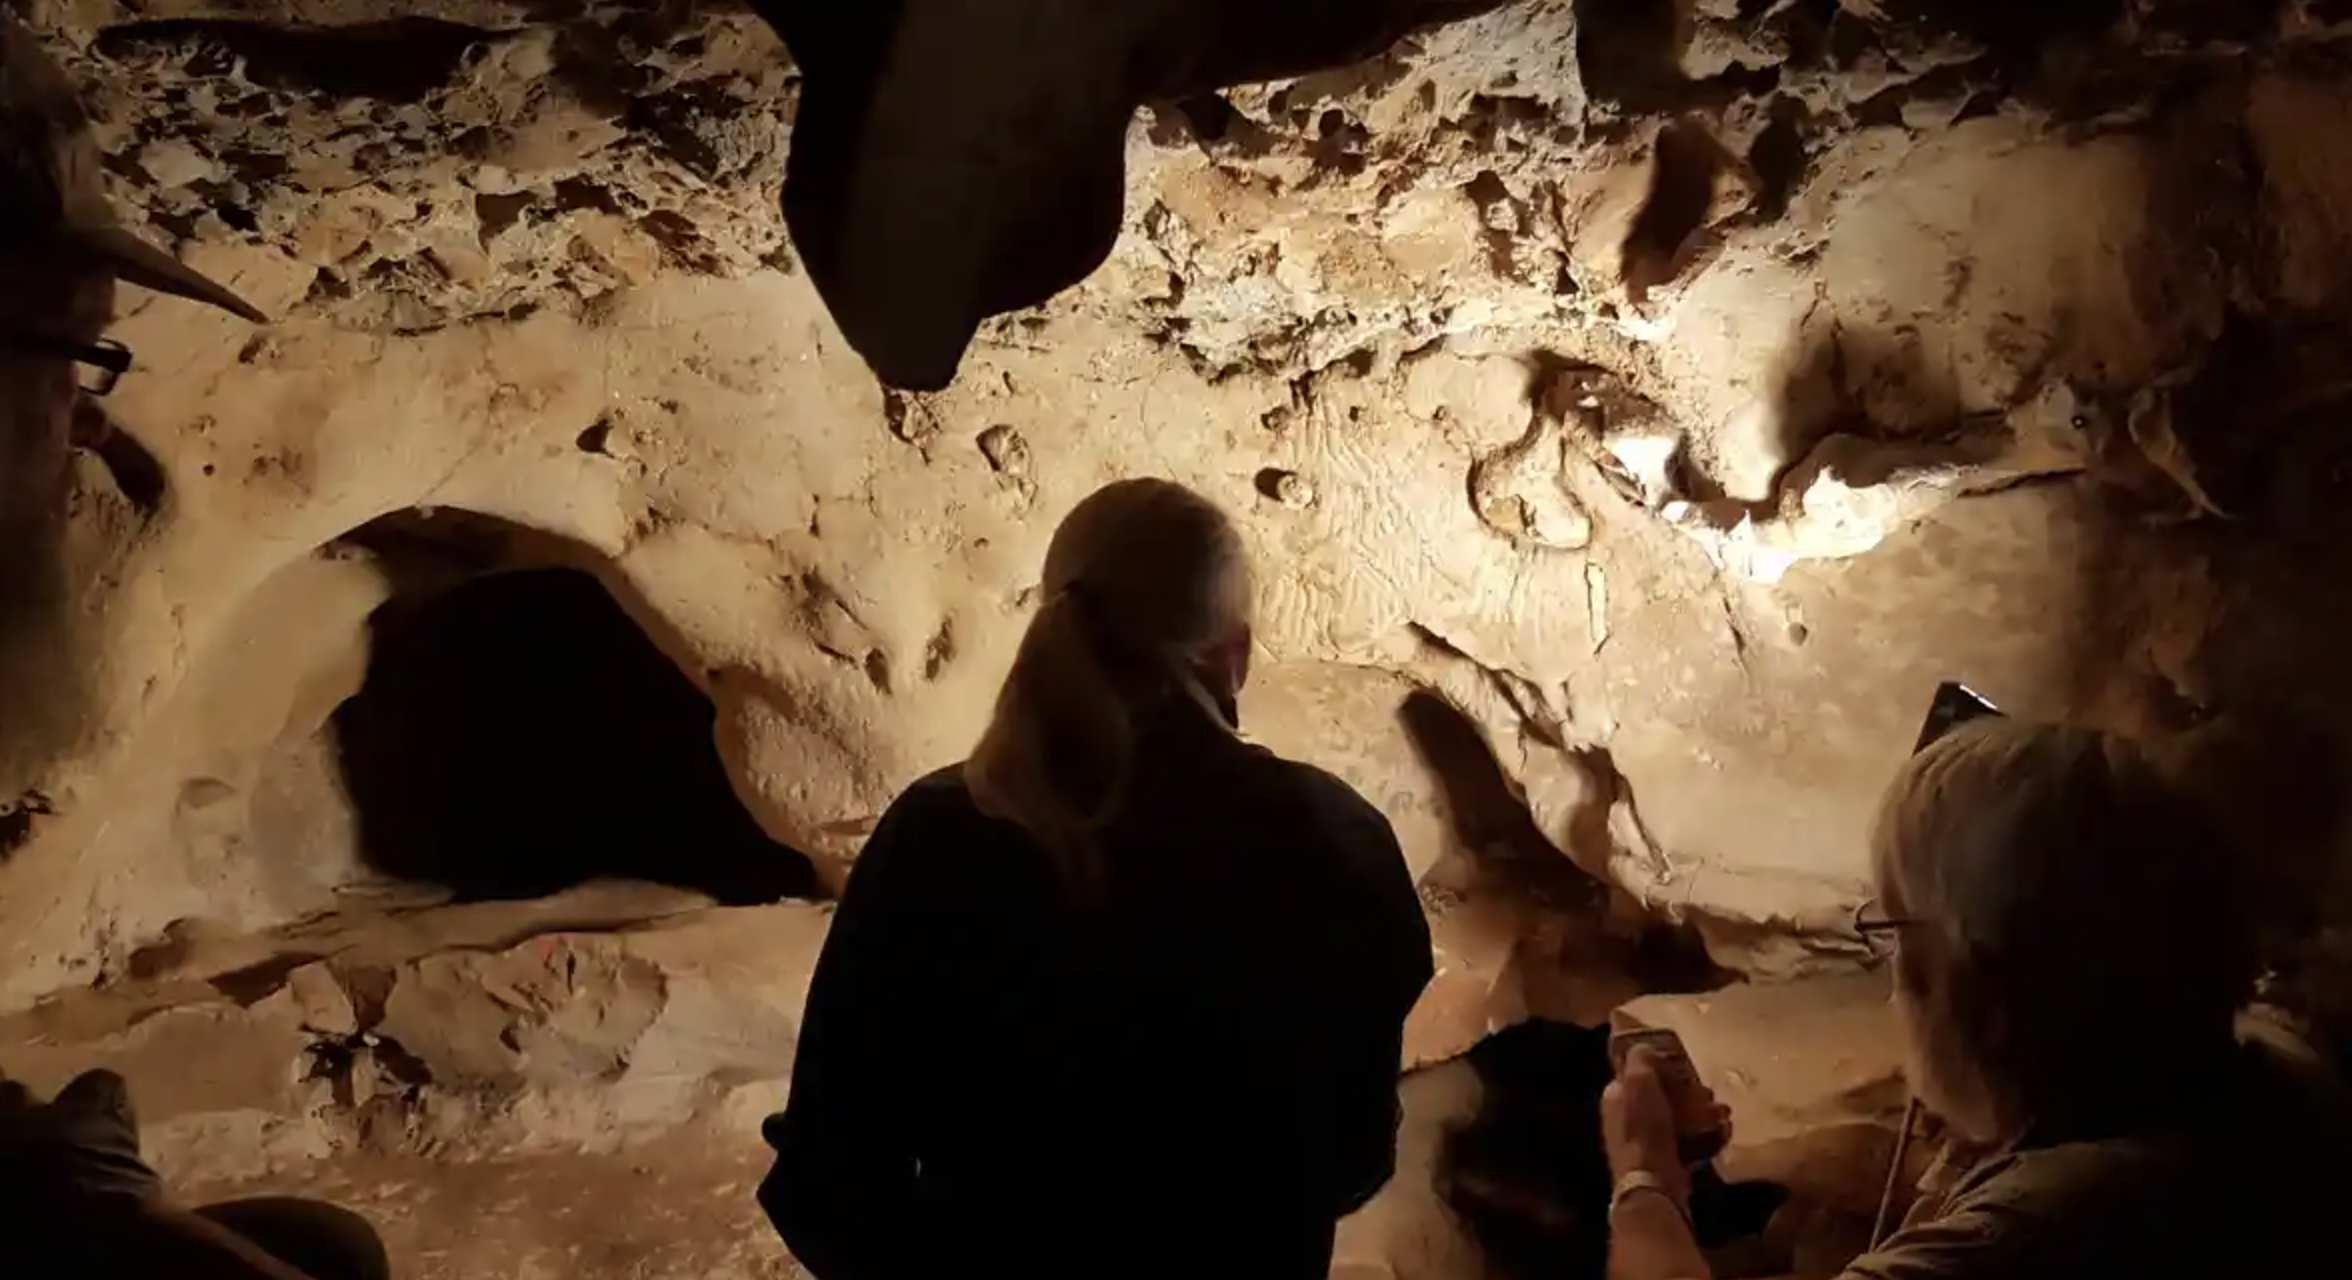 Researchers studying the mysterious symbols on the cave walls of the La Roche-Cotard cave in the picturesque Loire valley. Credit: Kristina Thomsen/SWNS.